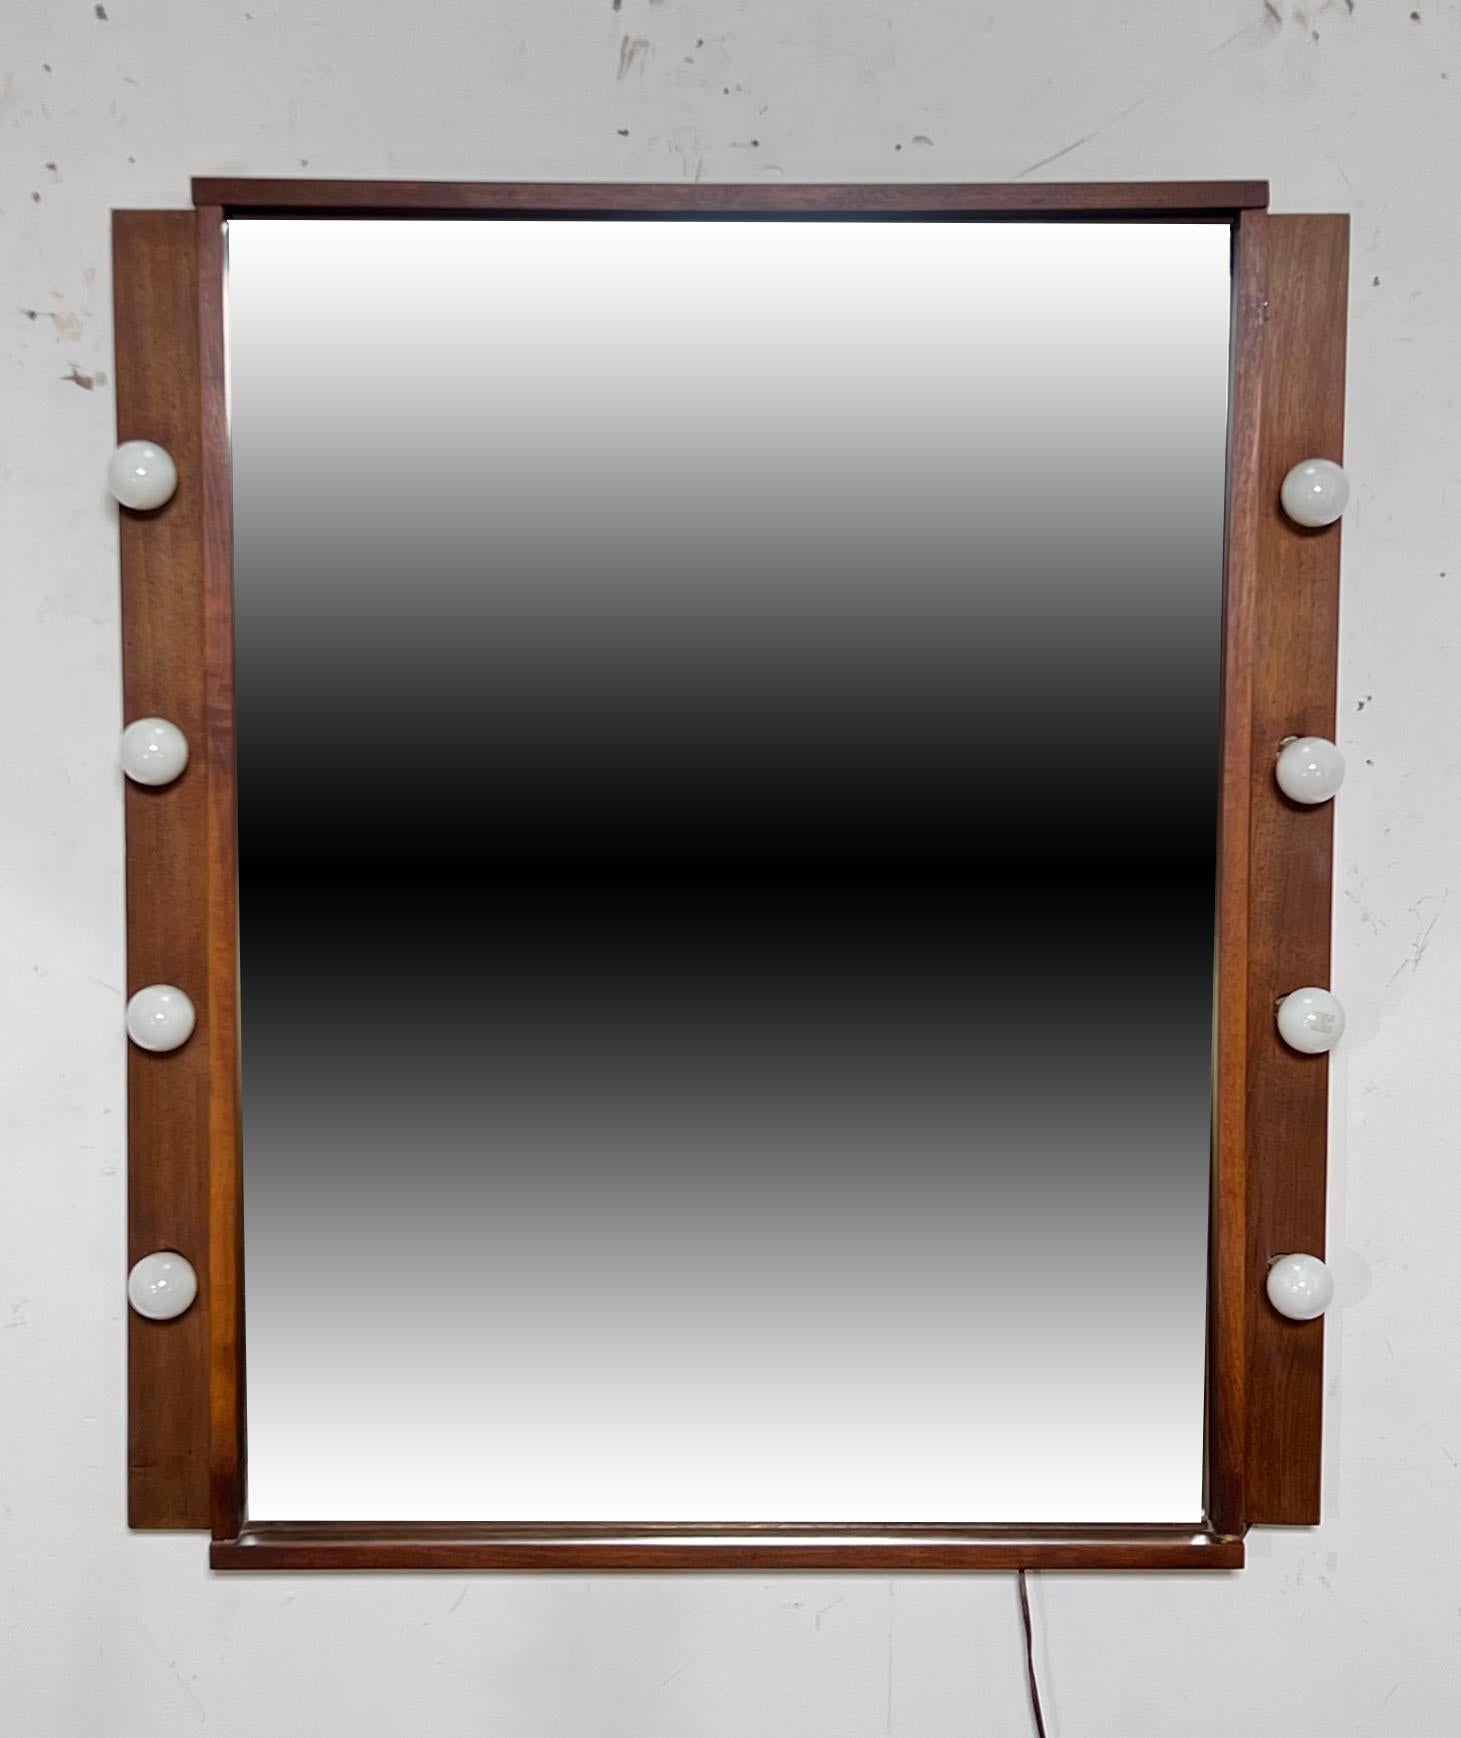 A craft made walnut bedroom mirror with vanity bulb surround, circa 1960s

Depth of 4.5